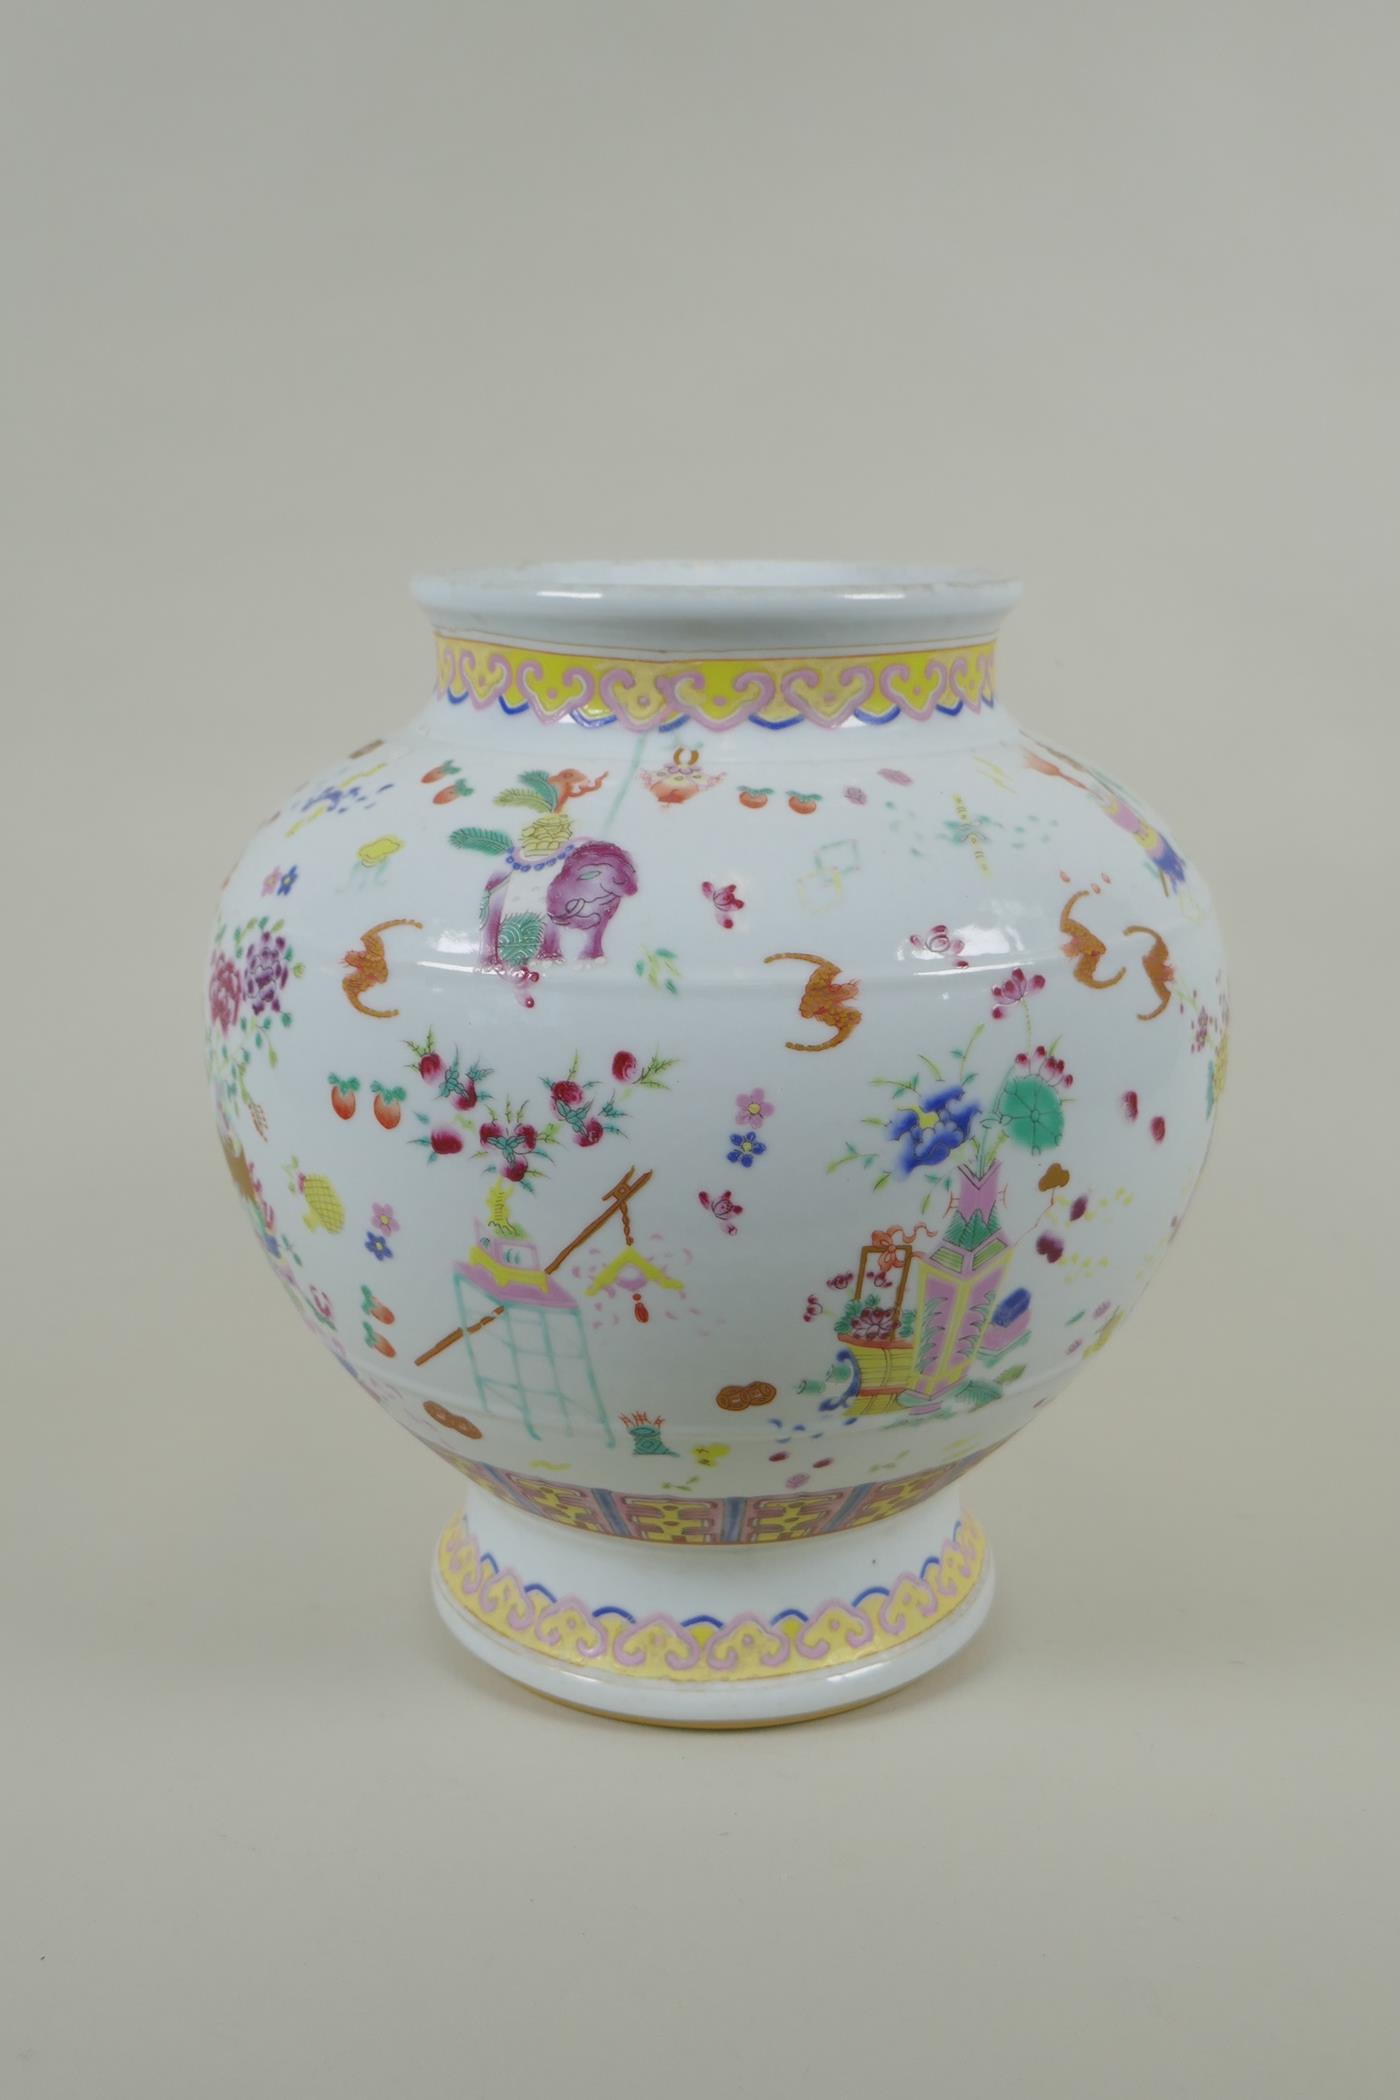 A Chinese polychrome porcelain vase decorated with bats and vases of flowers, GuangXu 6 character - Image 2 of 5